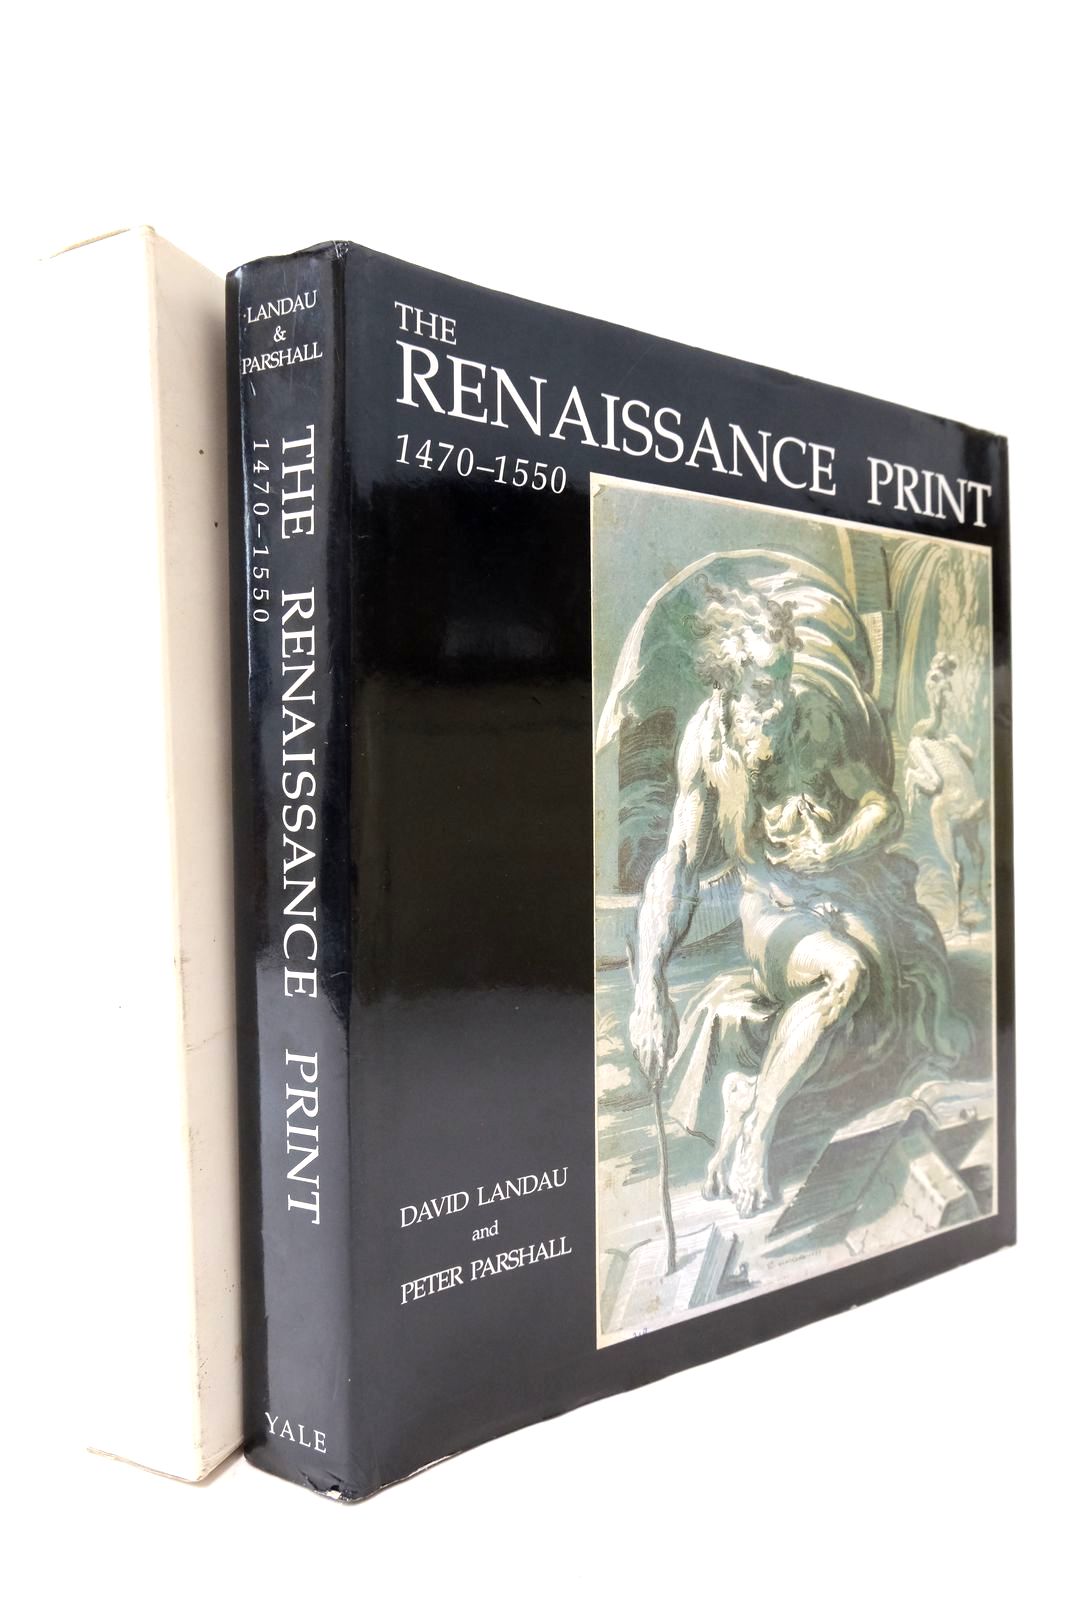 Photo of THE RENAISSANCE PRINT 1470-1550 written by Landau, David Parshall, Peter published by Yale University Press (STOCK CODE: 2139071)  for sale by Stella & Rose's Books